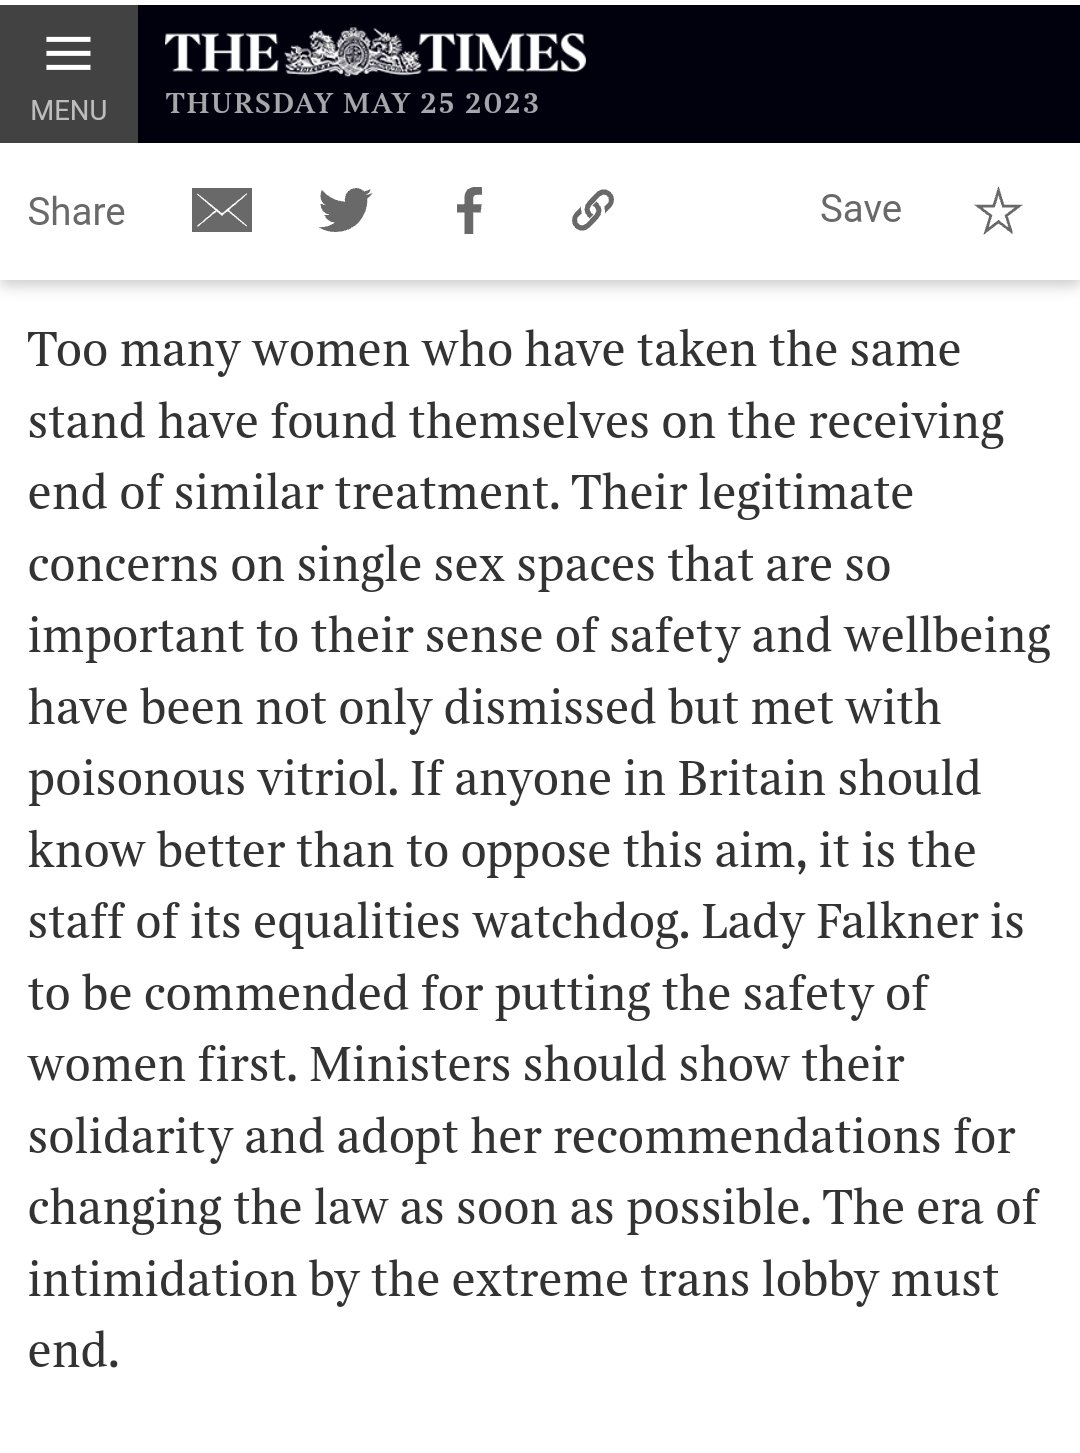 Too many women who have taken the same stand have found themselves on the receiving end of similar treatment. Their legitimate concerns on single sex spaces that are so important to their sense of safety and wellbeing have been not only dismissed but met with poisonous vitriol. If anyone in Britain should know better than to oppose this aim, it is the staff of its equalities watchdog. Lady Falkner is to be commended for putting the safety of women first. Ministers should show their solidarity and adopt her recommendations for changing the law as soon as possible. The era of intimidation by the extreme trans lobby must end.All of this is a result of people standing up and refusing to be told that they must not do their job.